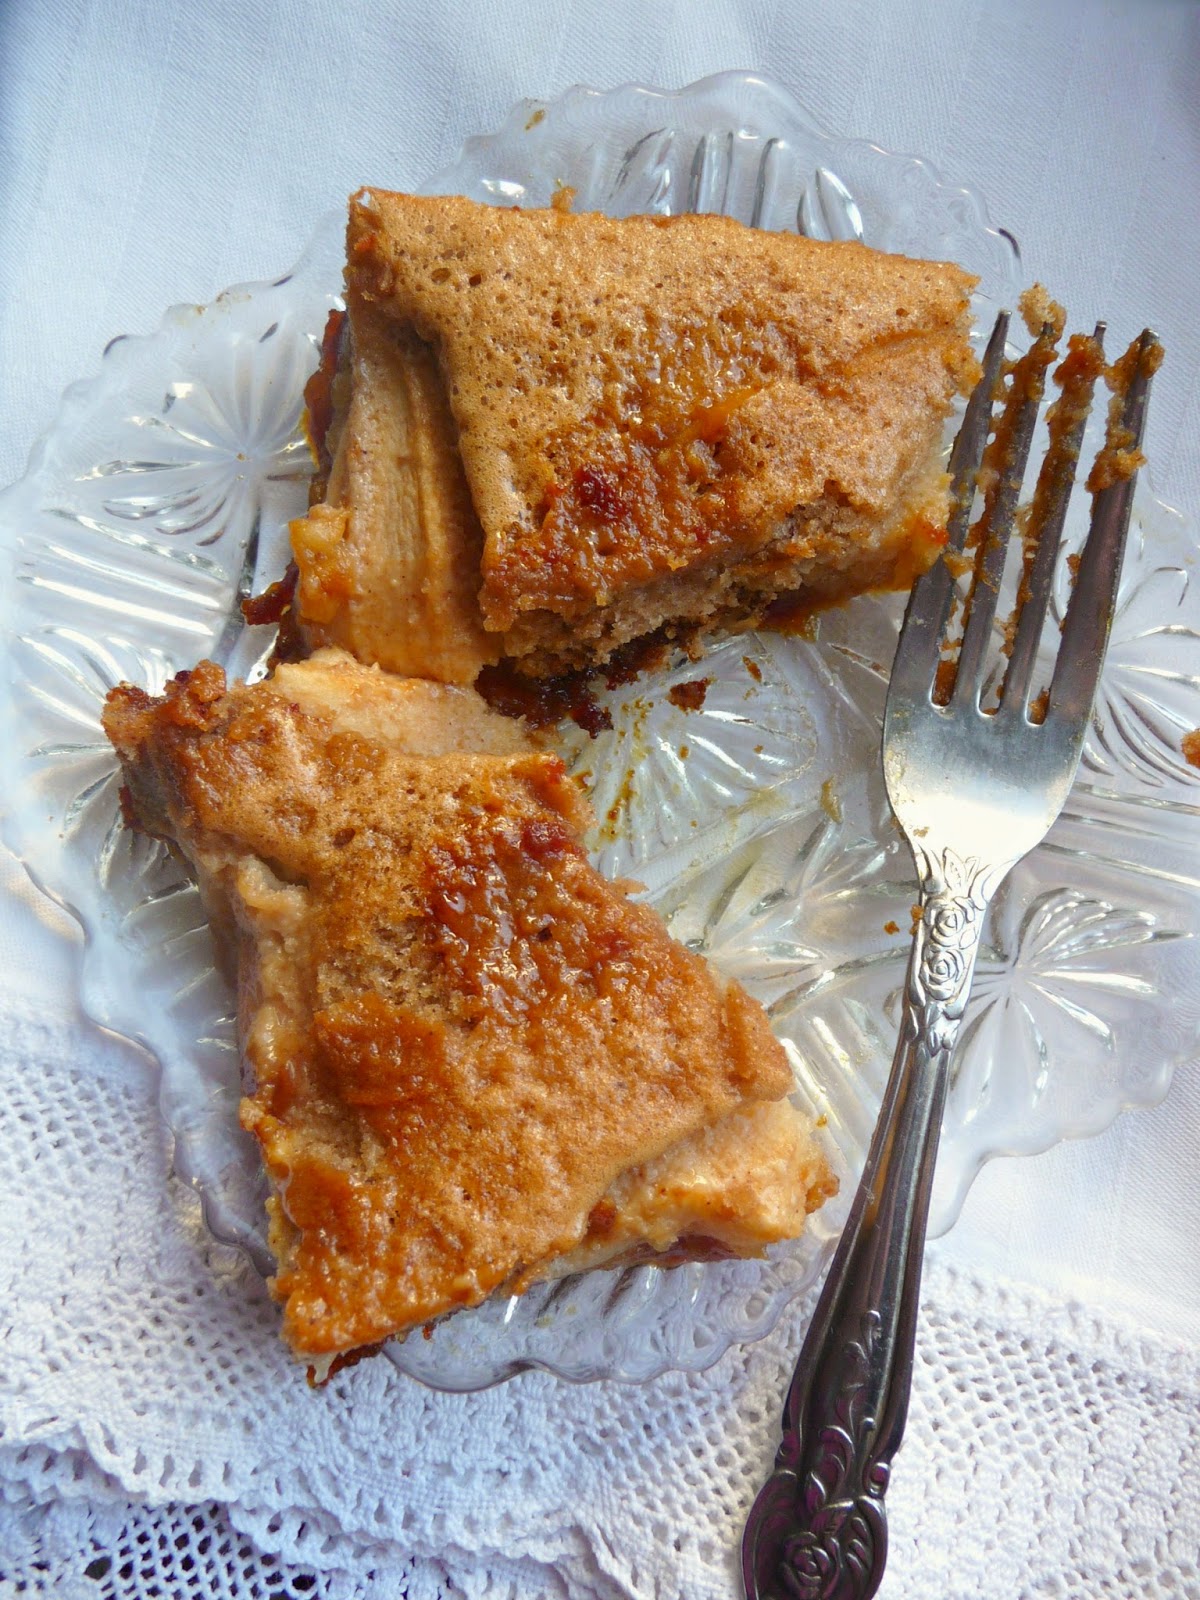 http://theseamanmom.com/apple-cake-with-whole-apples-cinnamon-and-nuts/